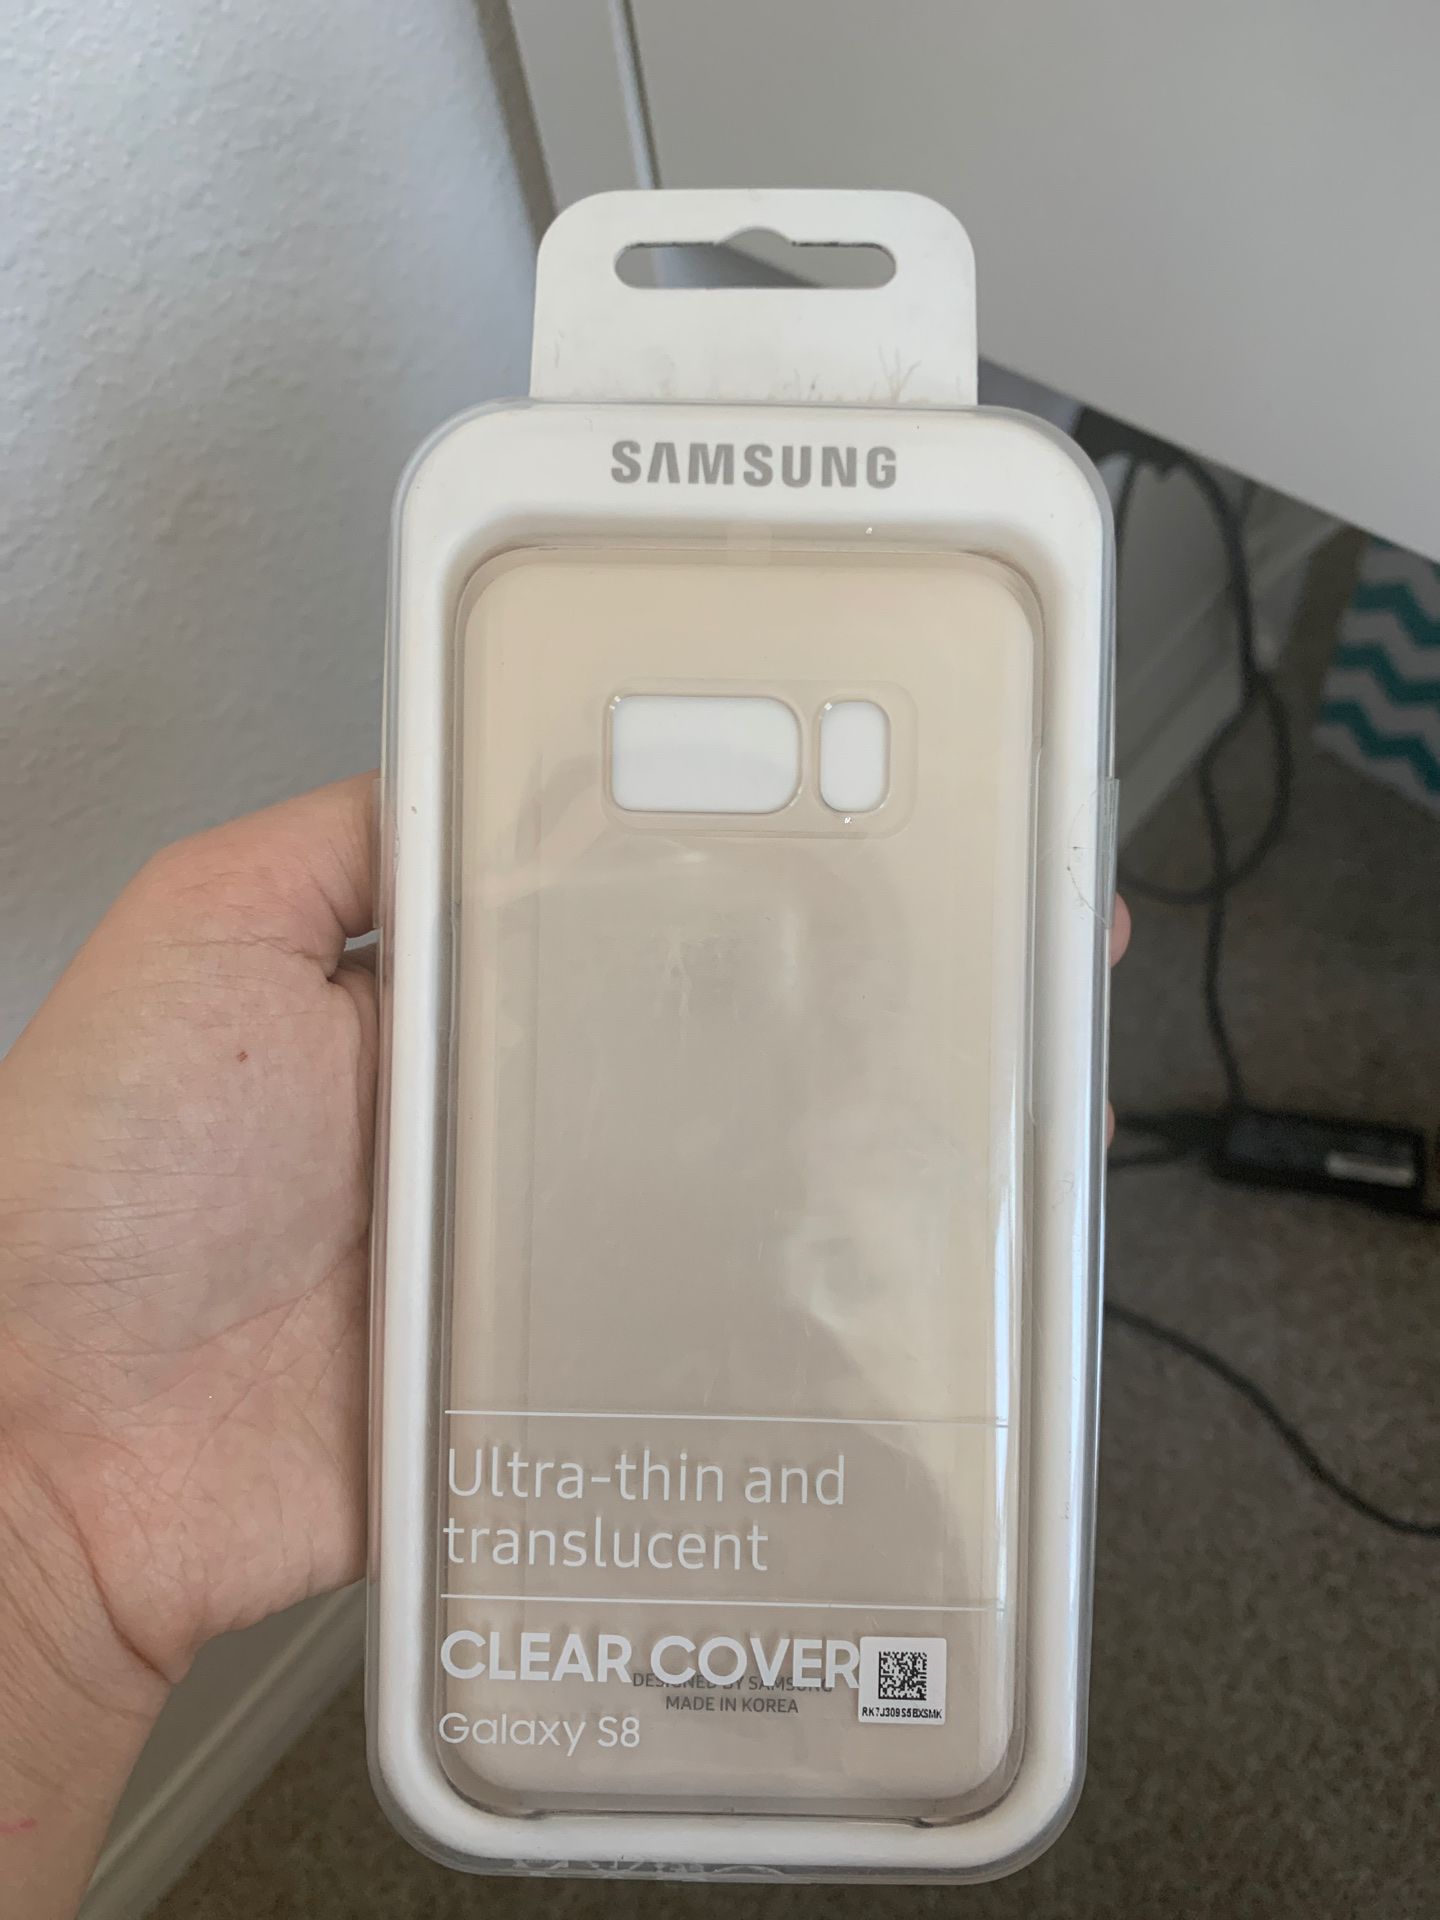 Samsung Galaxy S8 ultra-thin and translucent phone case